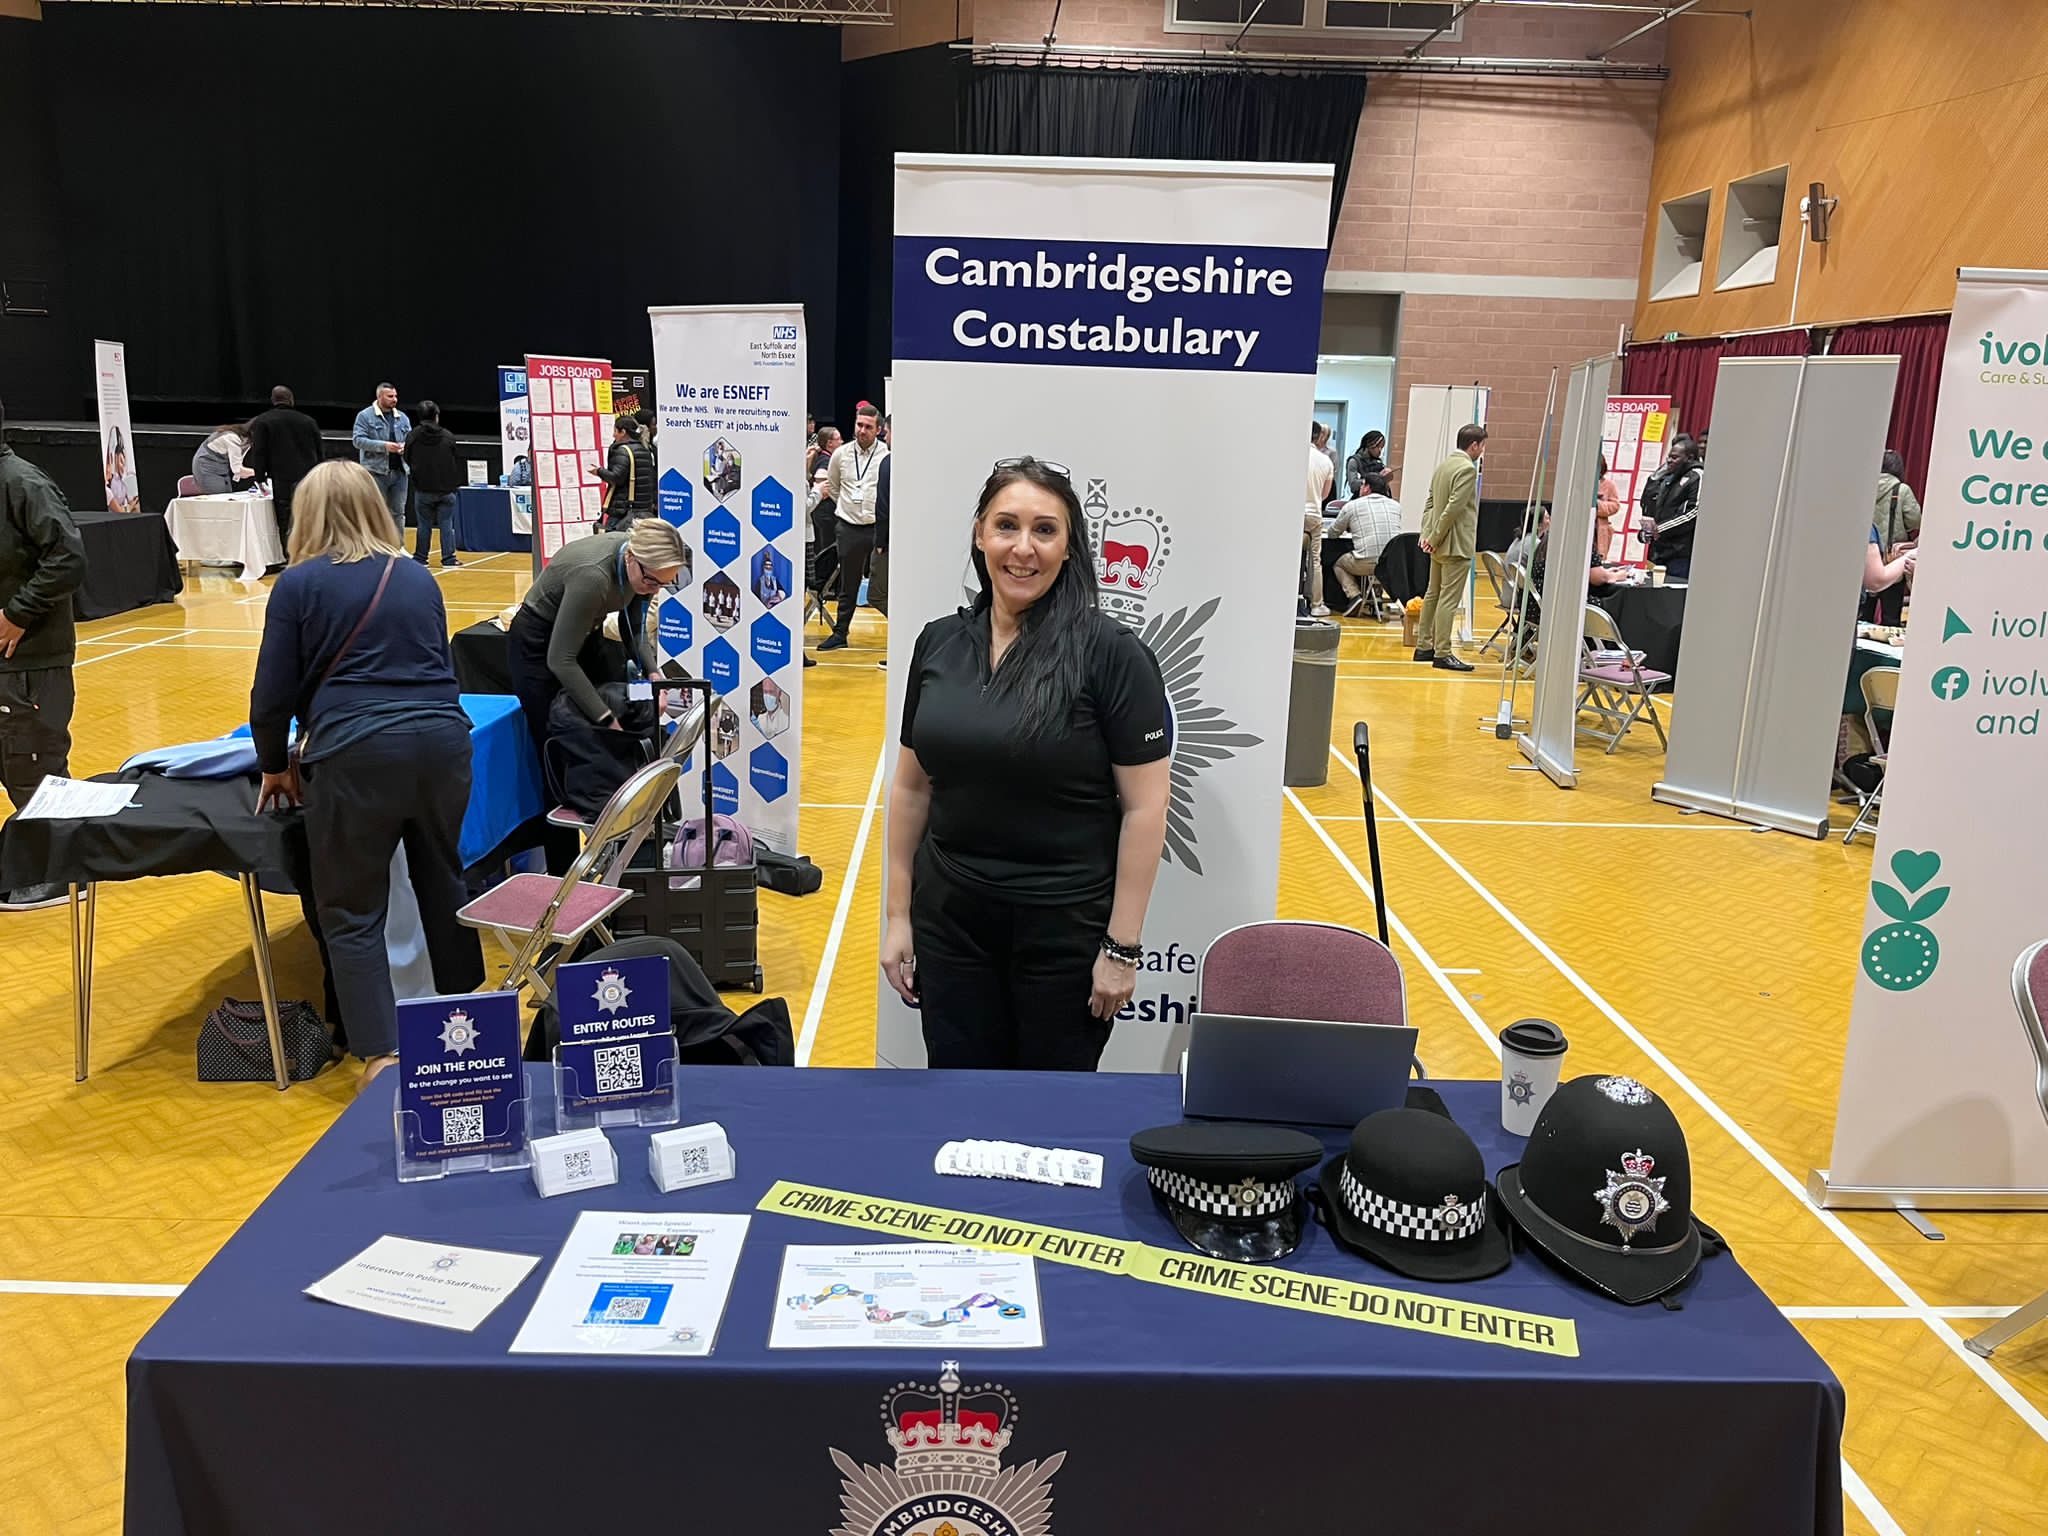 Cambridgeshire Constabulary at our event in Colchester